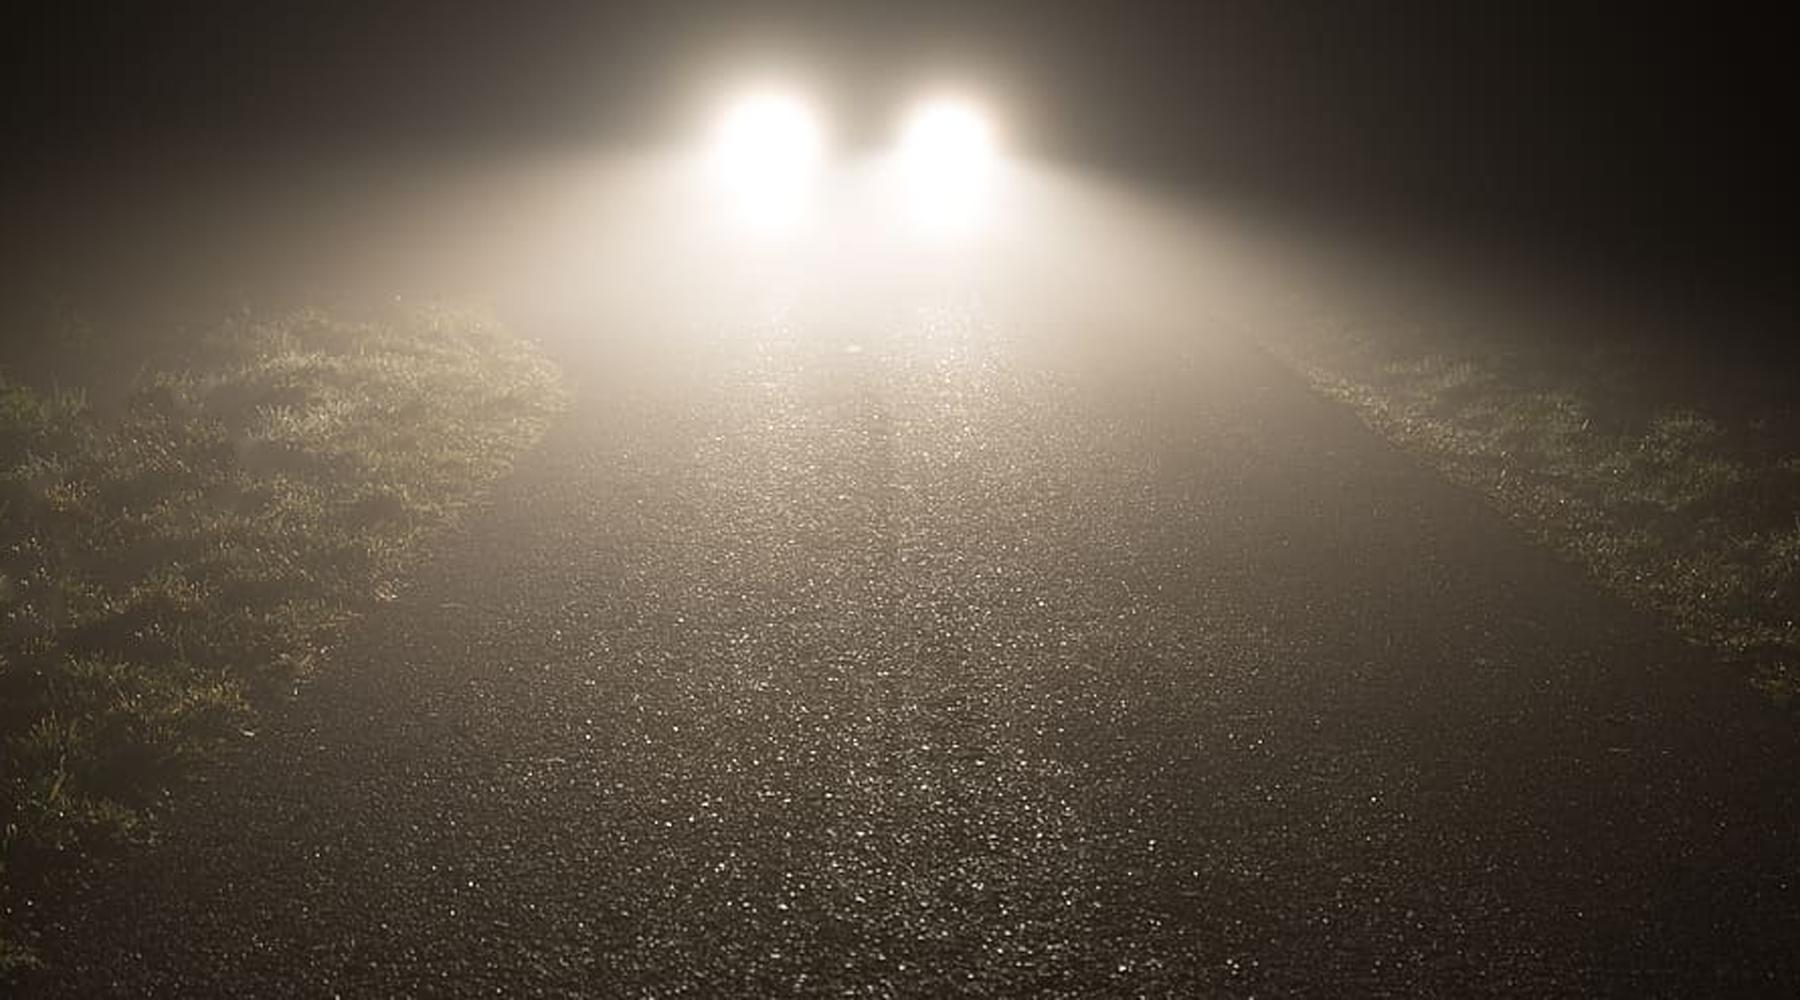 Tips for driving in low-visibility conditions